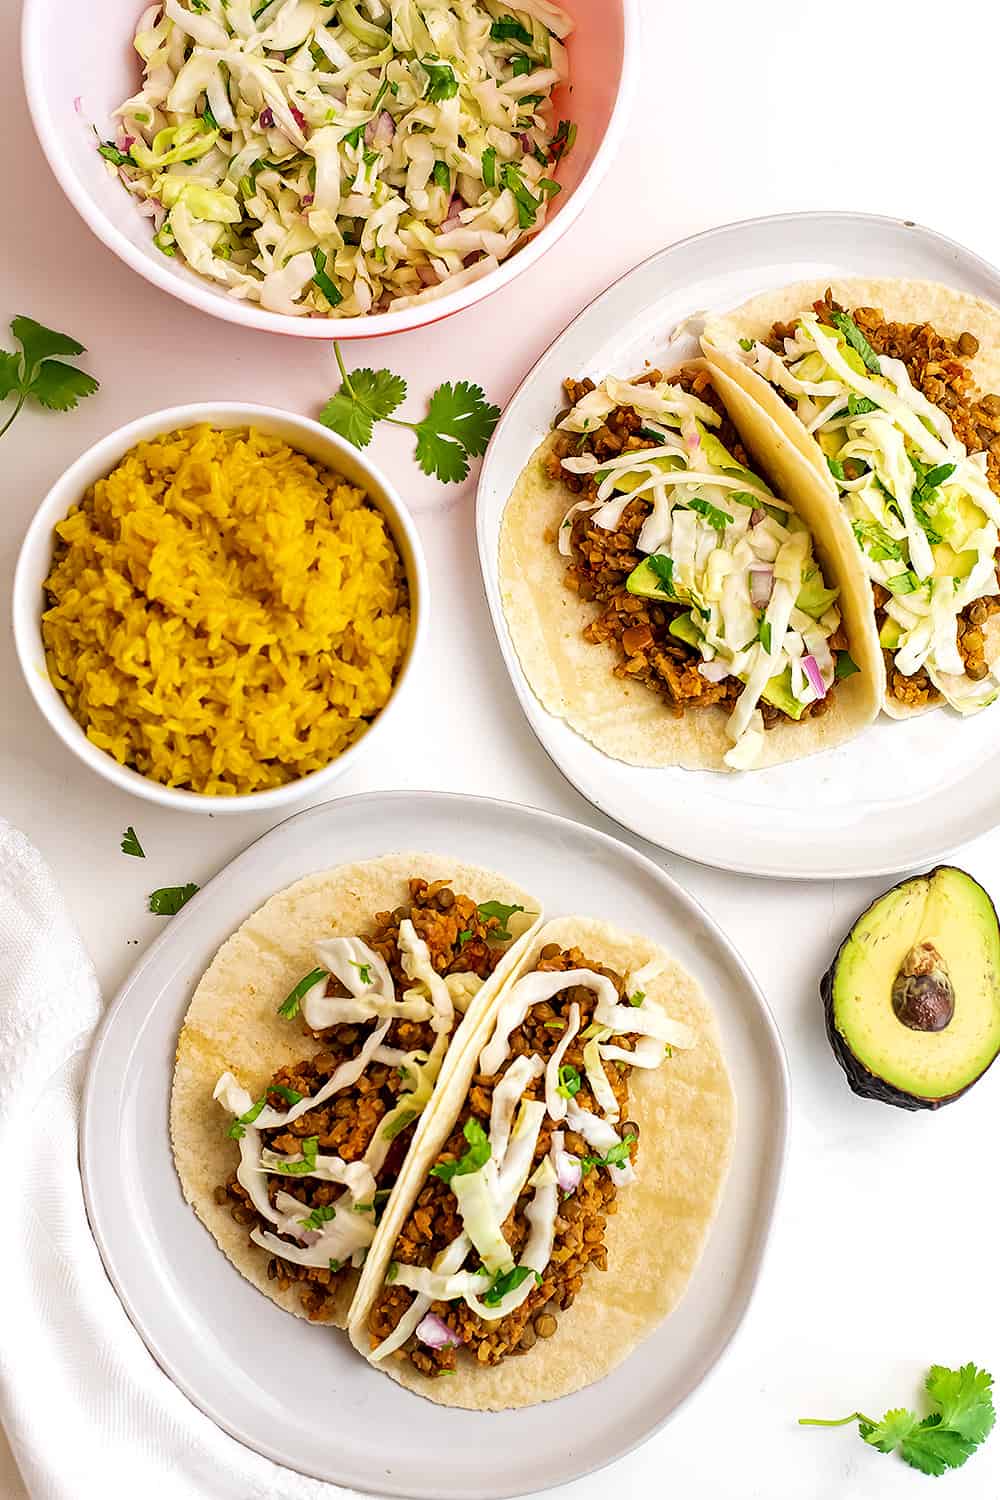 Lentil cauliflower tacos on plates with yellow rice.